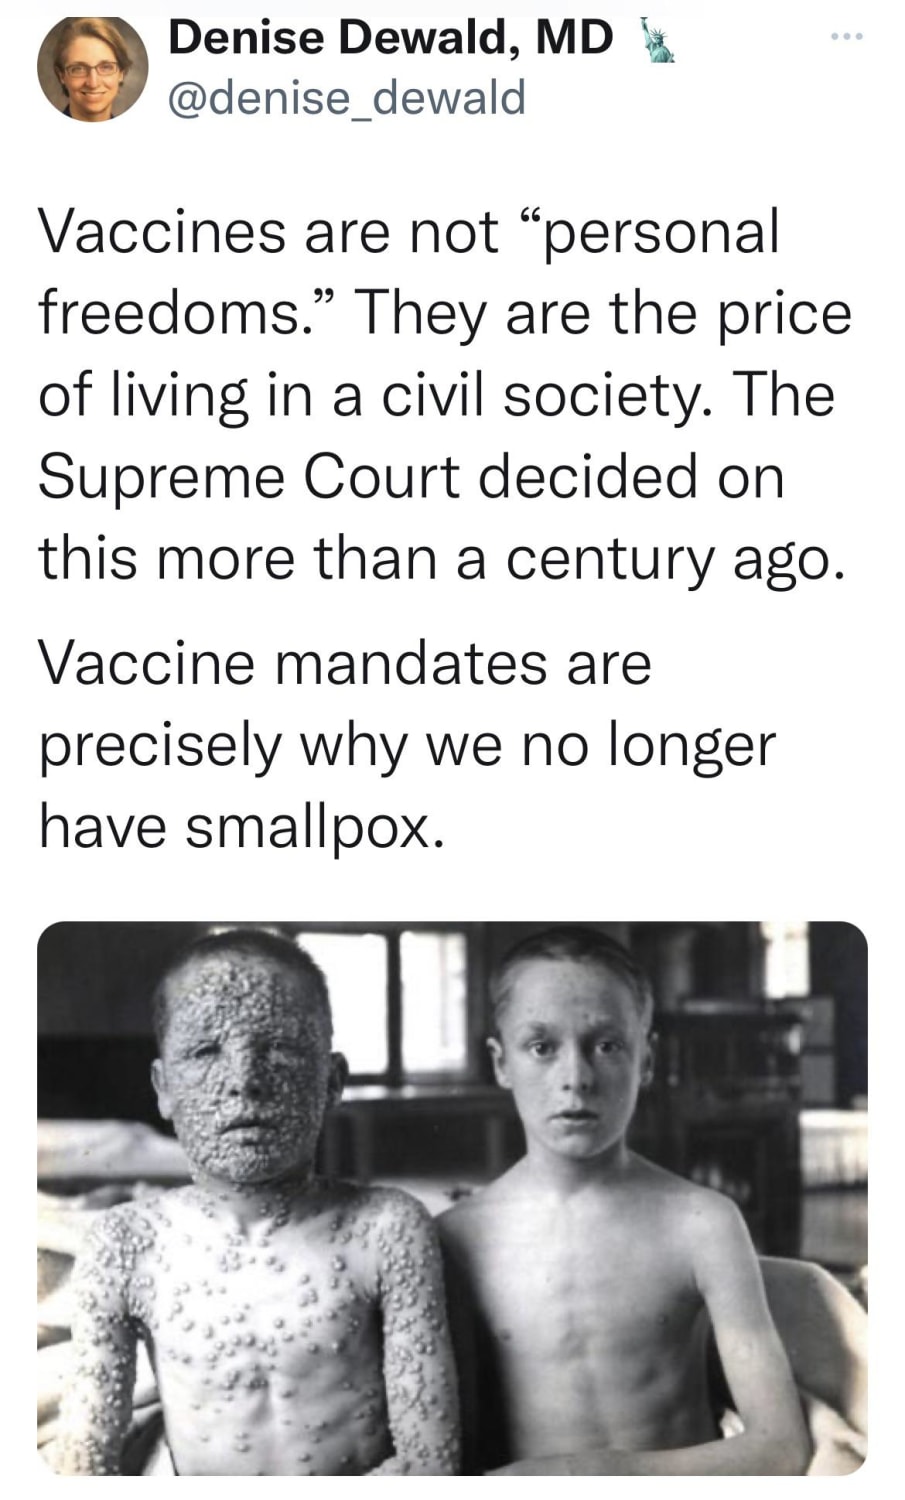 Vaccines save lives!